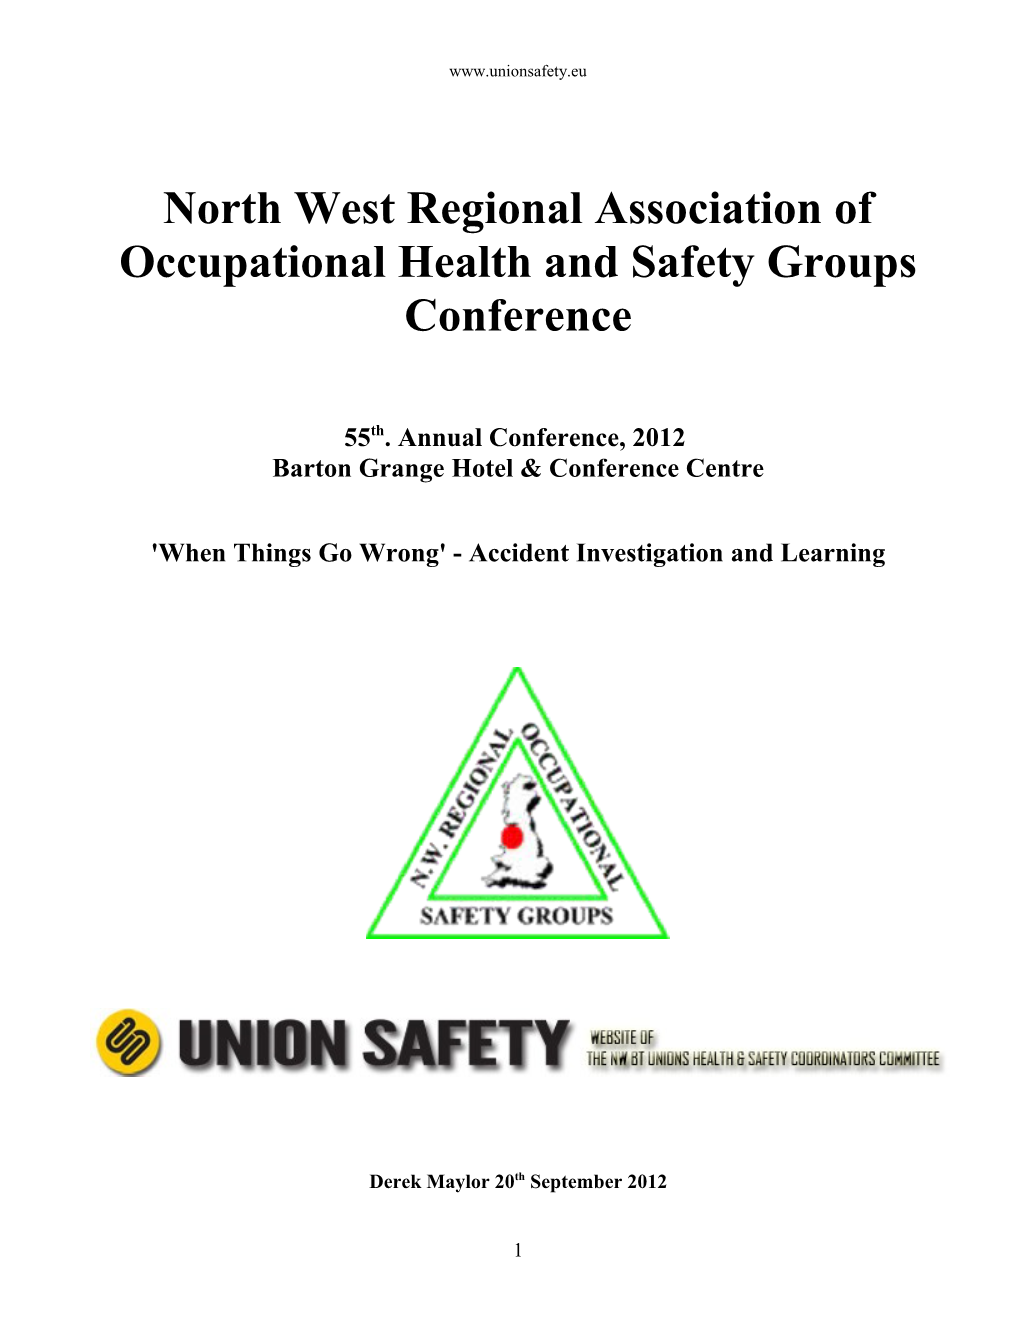 North West Regional Association of Occupational Health and Safety Groups